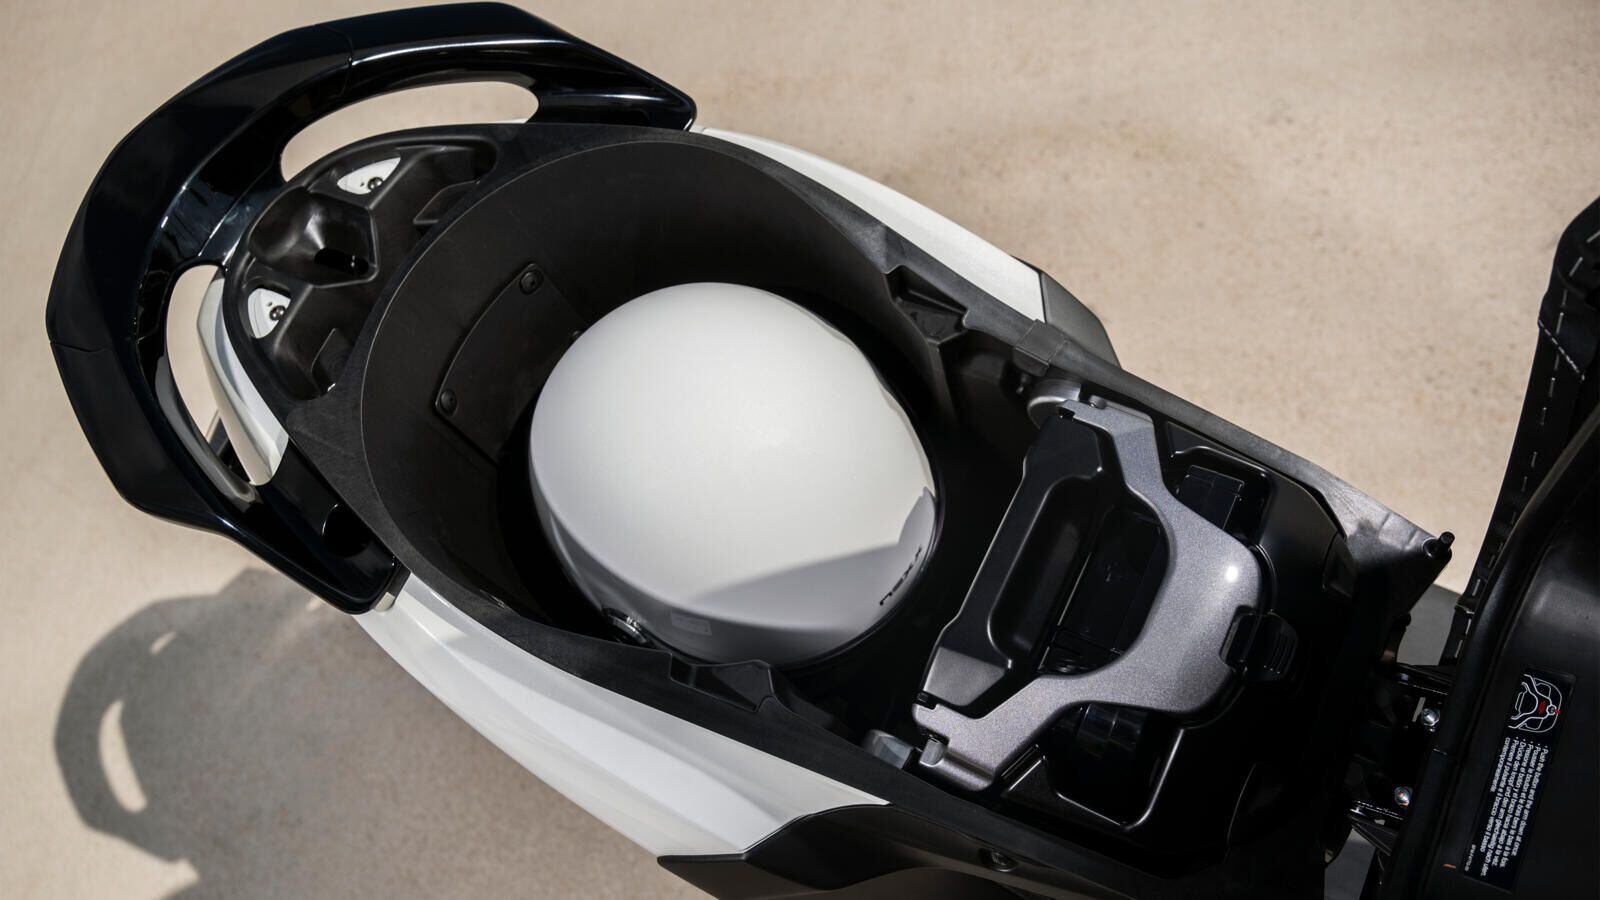 The Neo’s underseat 27-liter storage area has room for one jet-style helmet—unless you stick another battery in there.